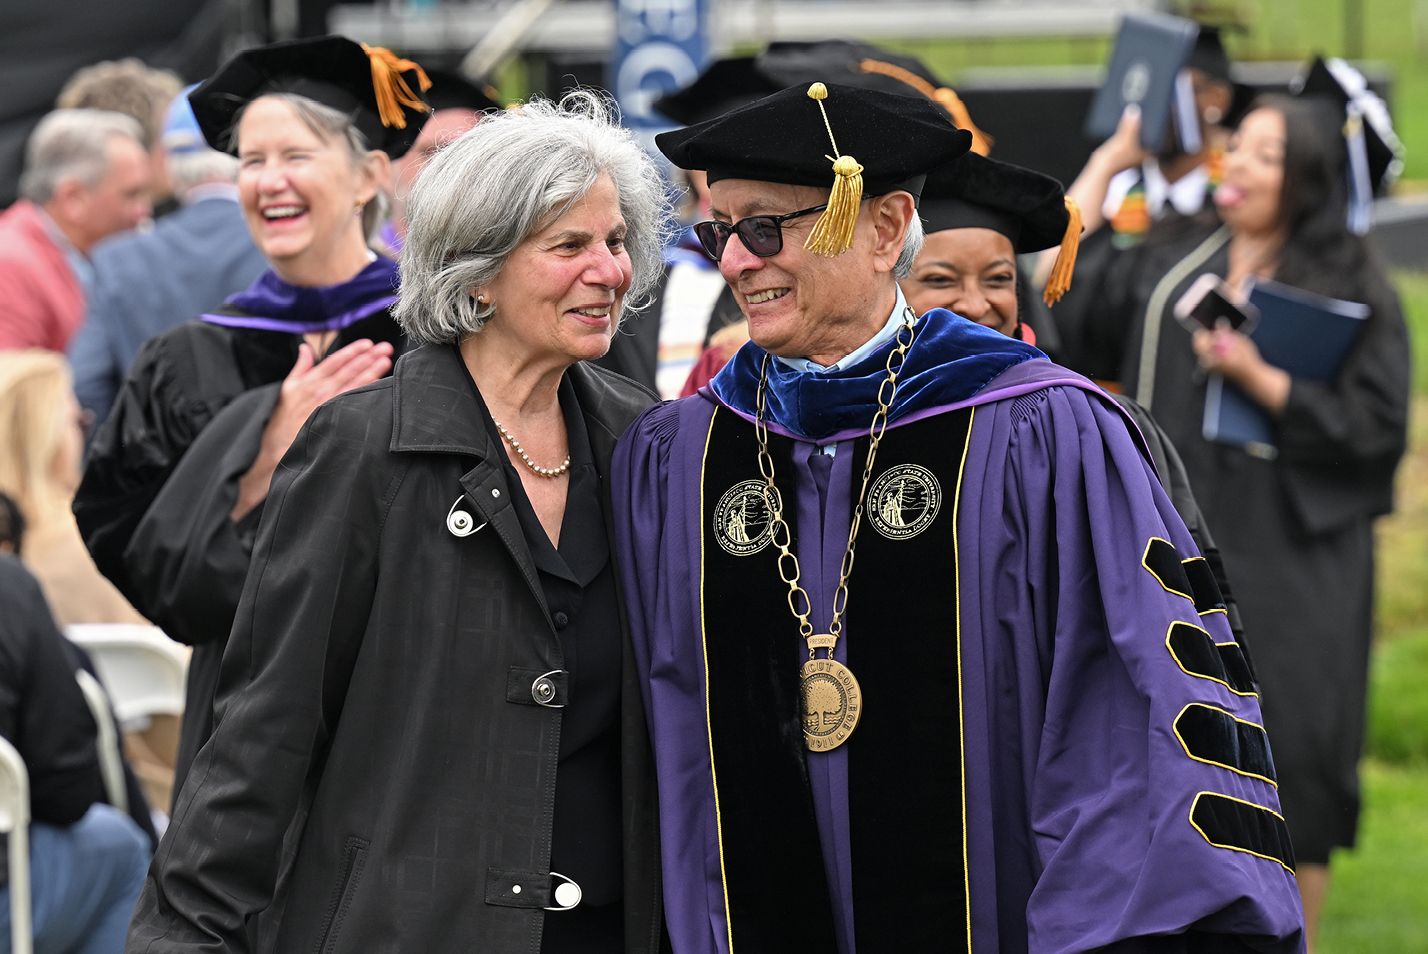 Interim President Les Wong and his wife, Phyllis Michael Wong, at Commencement